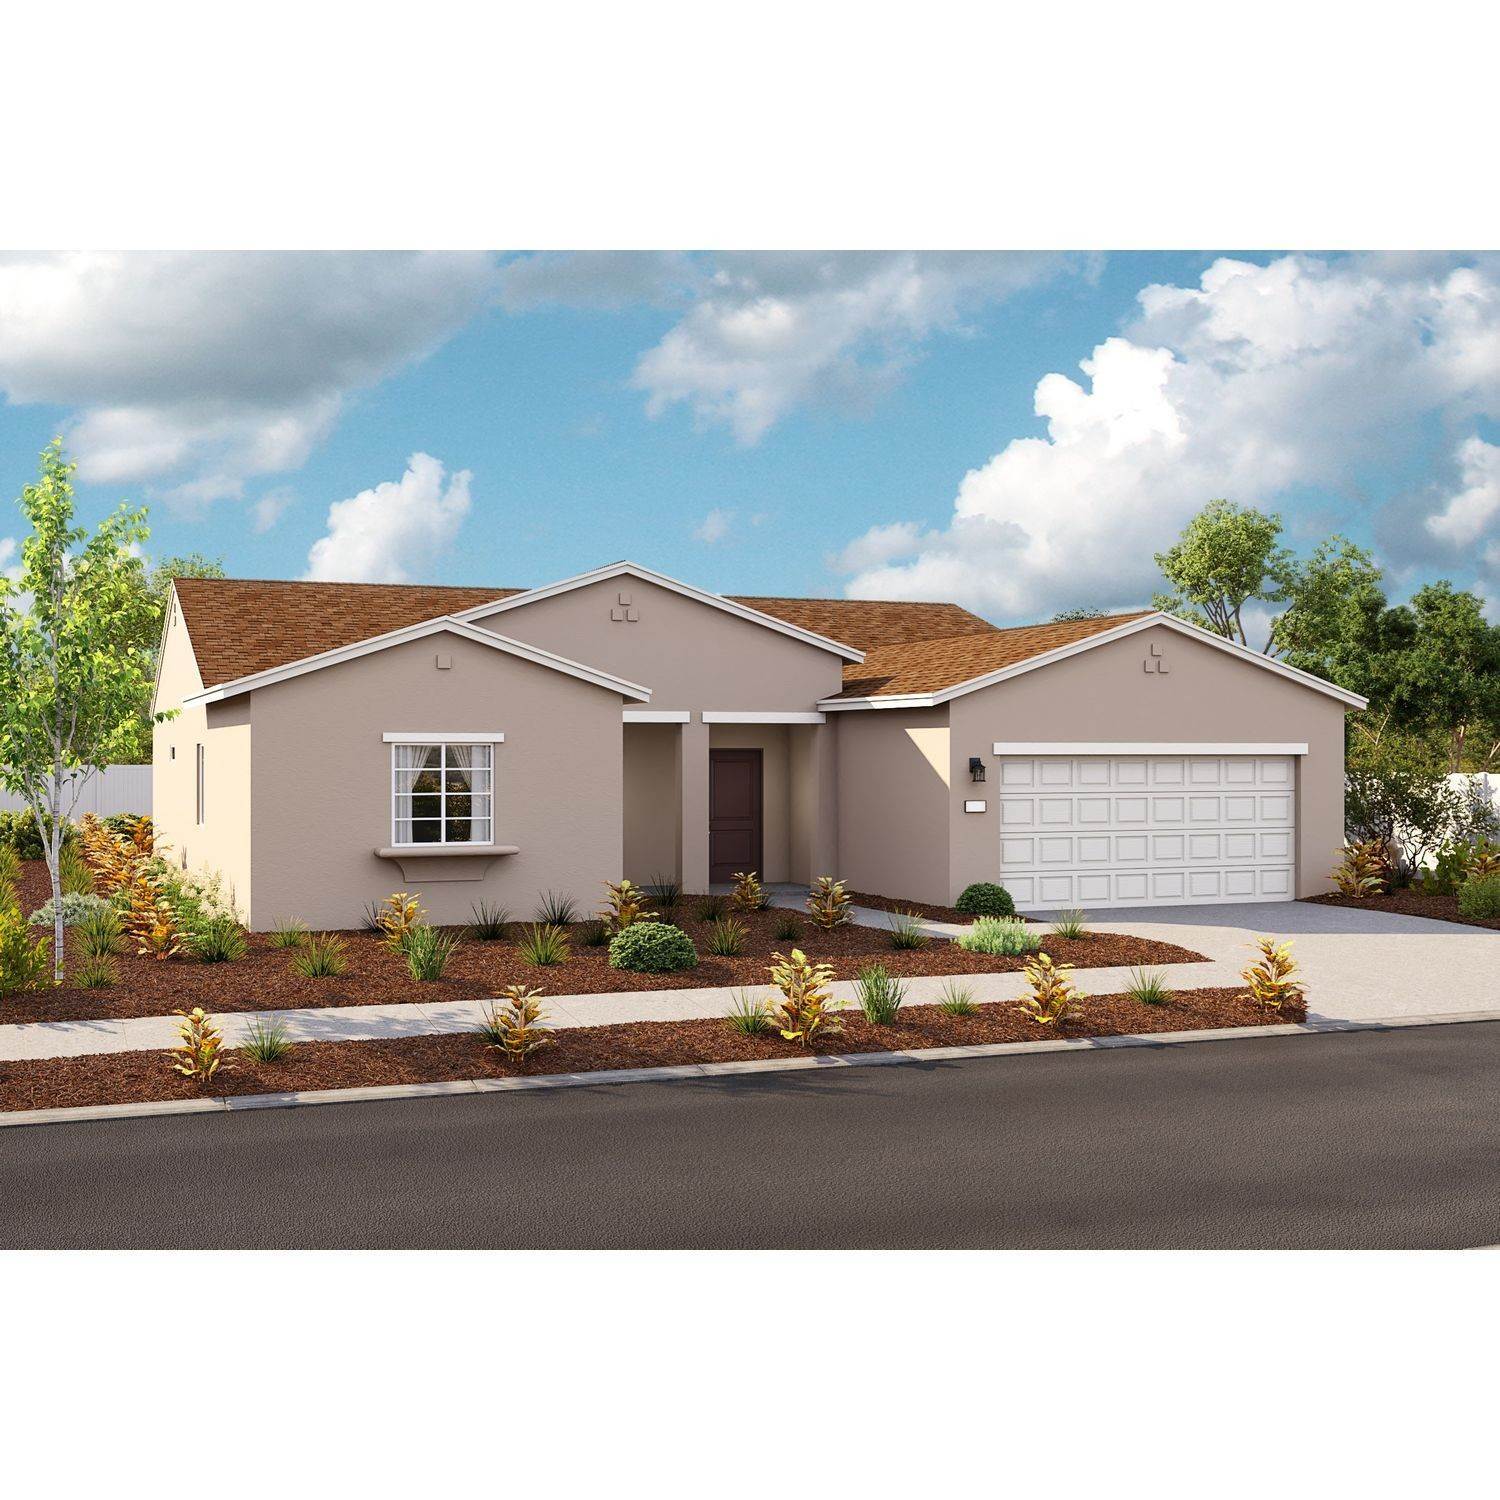 Single Family for Active at Aspire At Garden Glen - Sage Jasmine Drive & Luther Road LIVE OAK, CALIFORNIA 95953 UNITED STATES